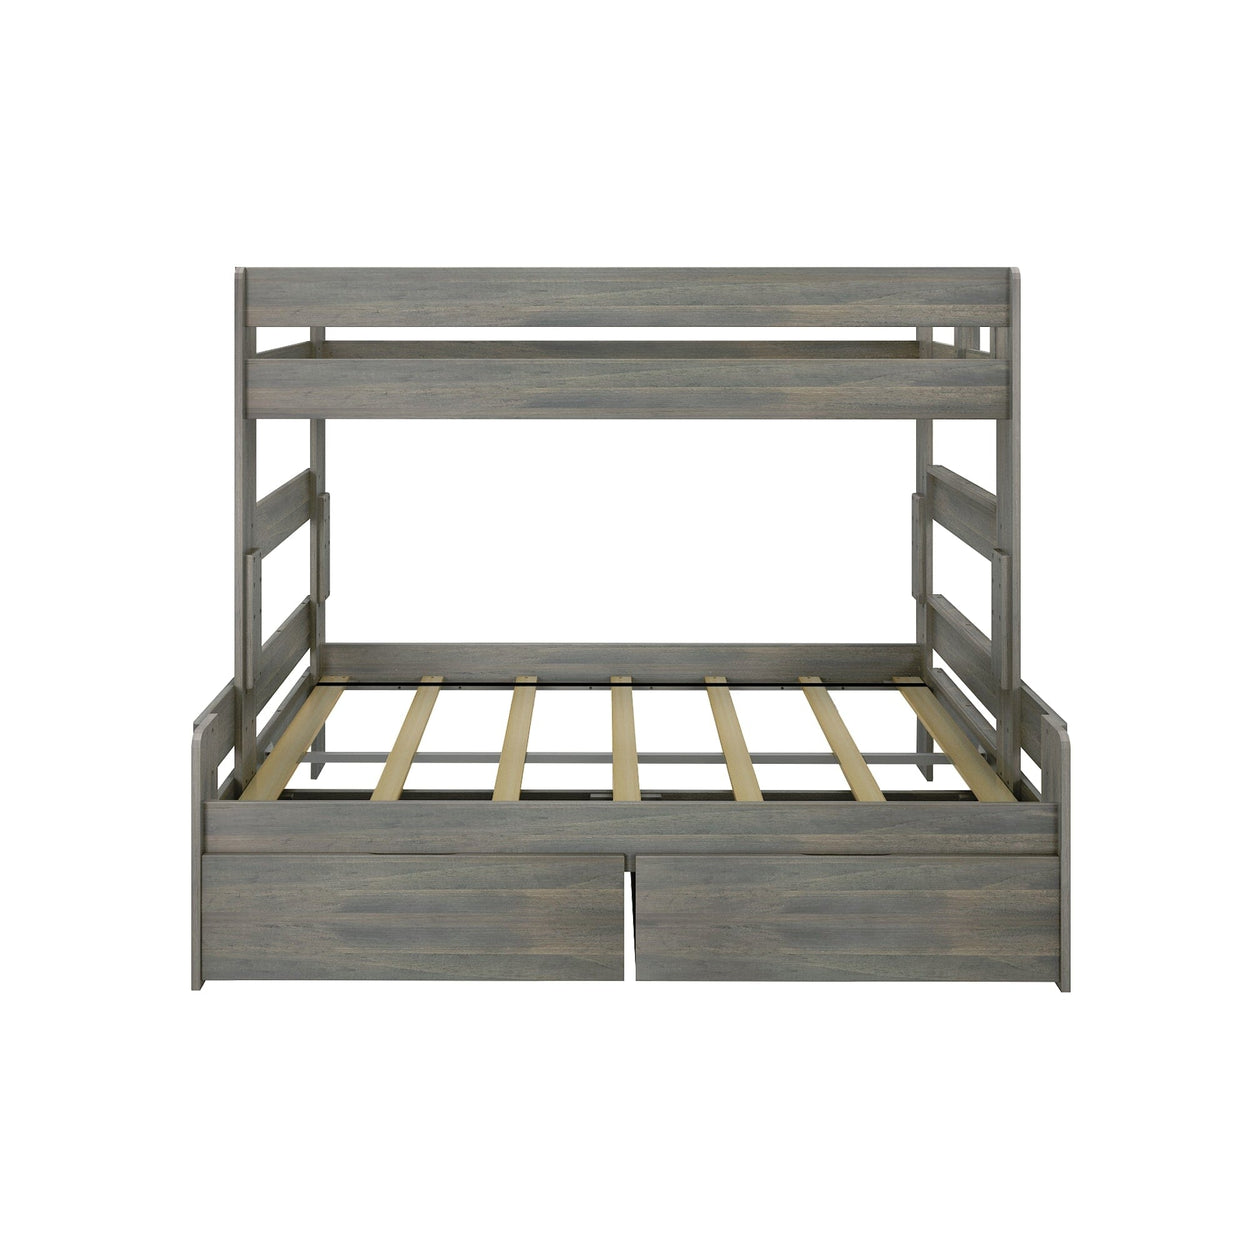 197231-185 : Bunk Beds Farmhouse Twin over Full Bunk Bed with Storage Drawers, Driftwood